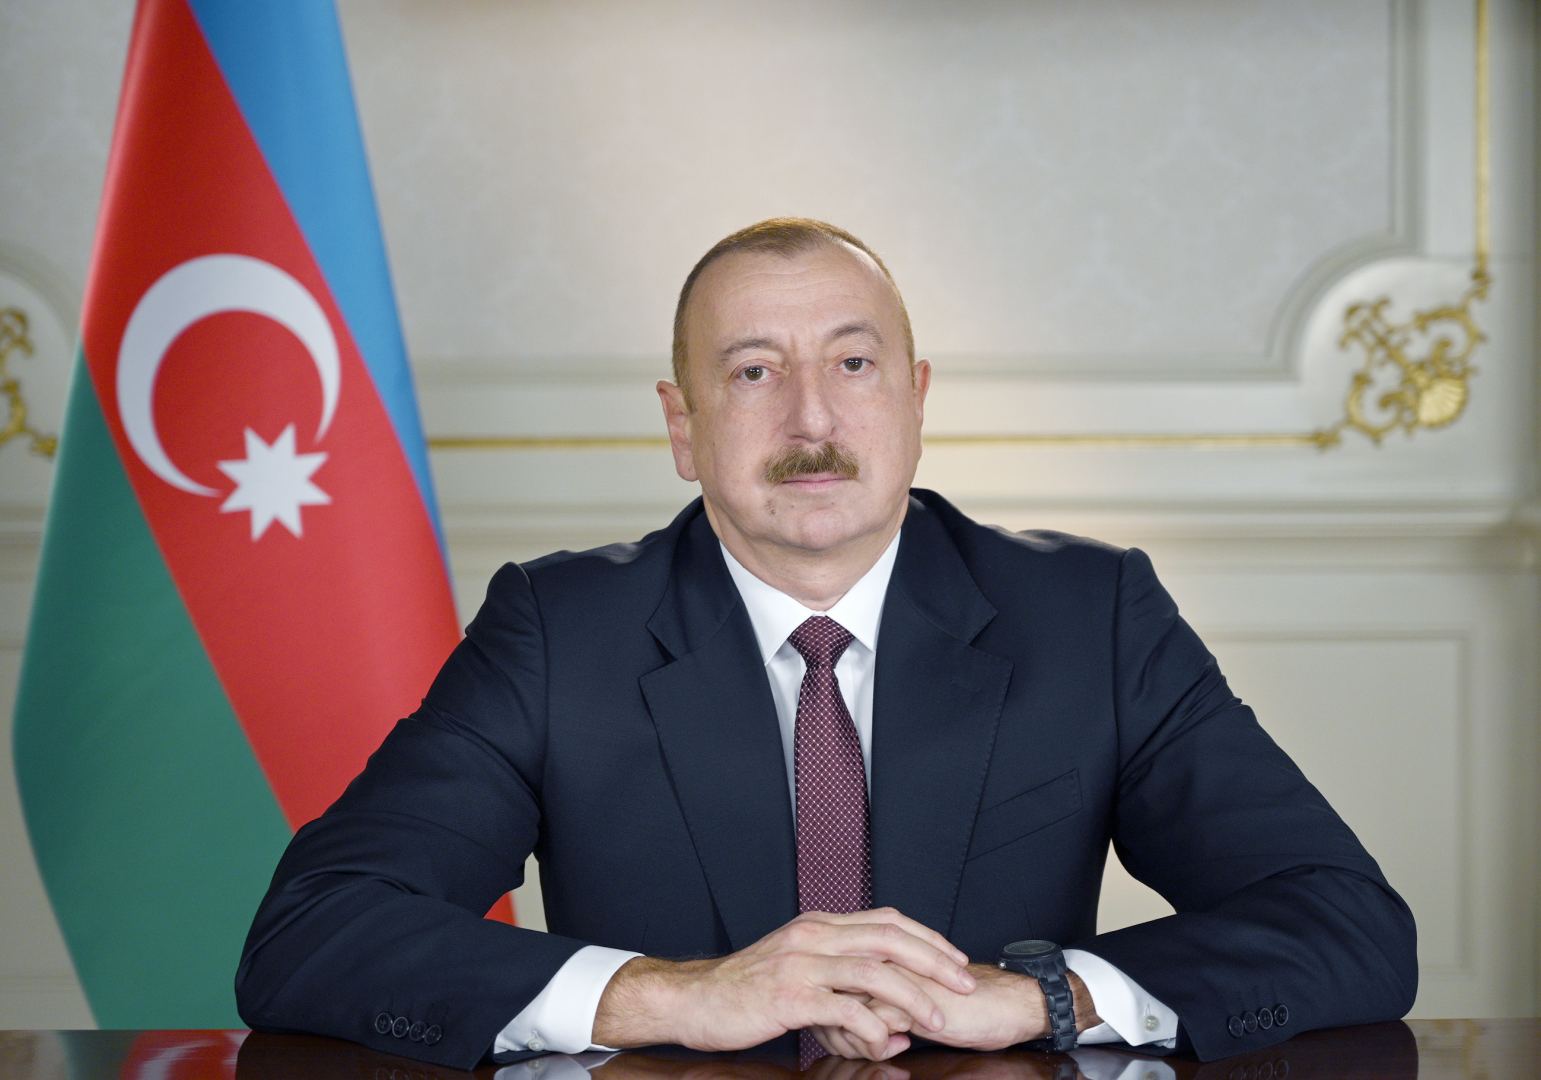 Azerbaijani president allocates funds for 'green energy' zone in liberated territories